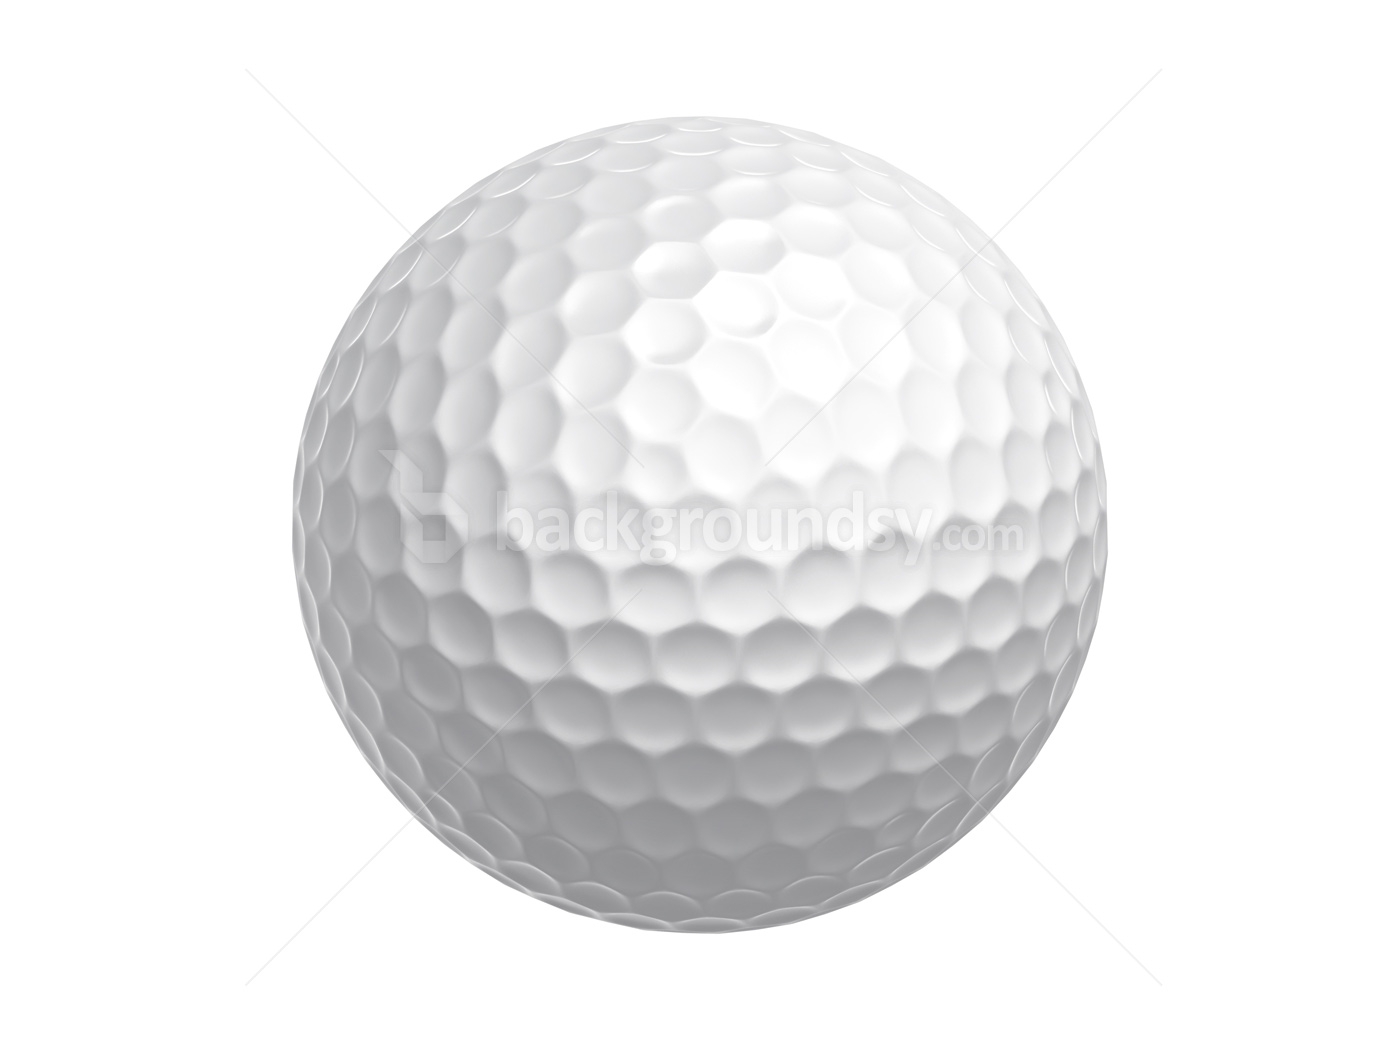 Golf ball pictures of golf clubs and balls clipart clipartbarn